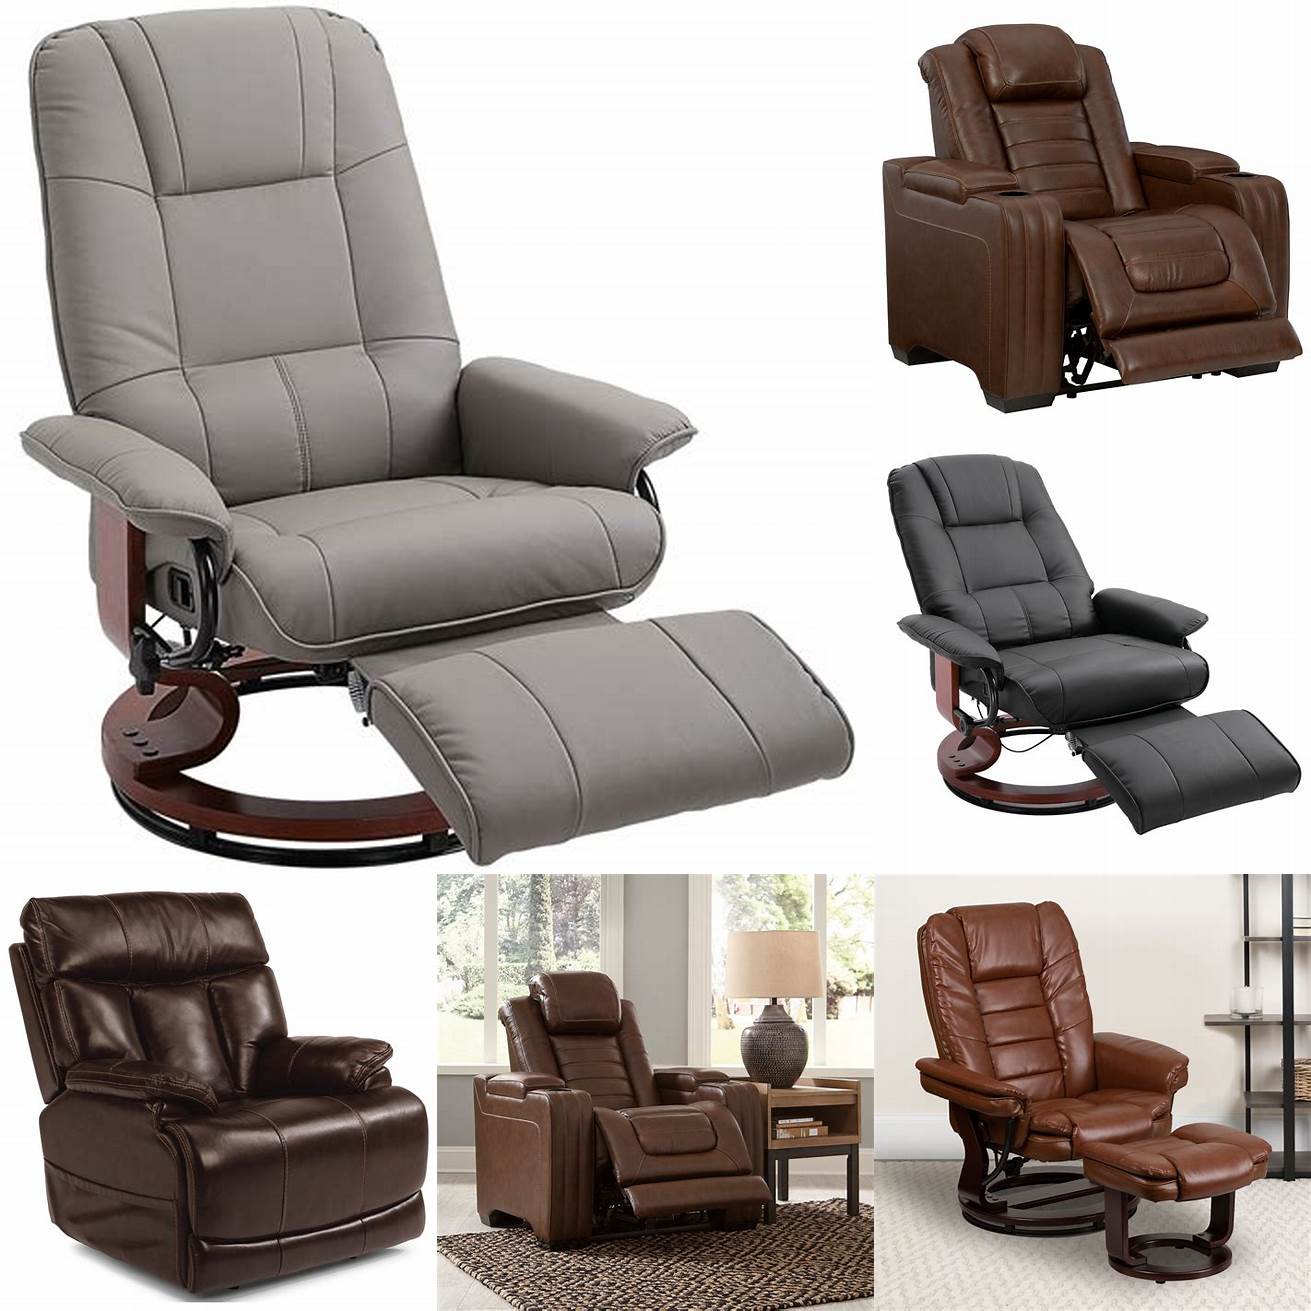 Adjustable chairs and recliners